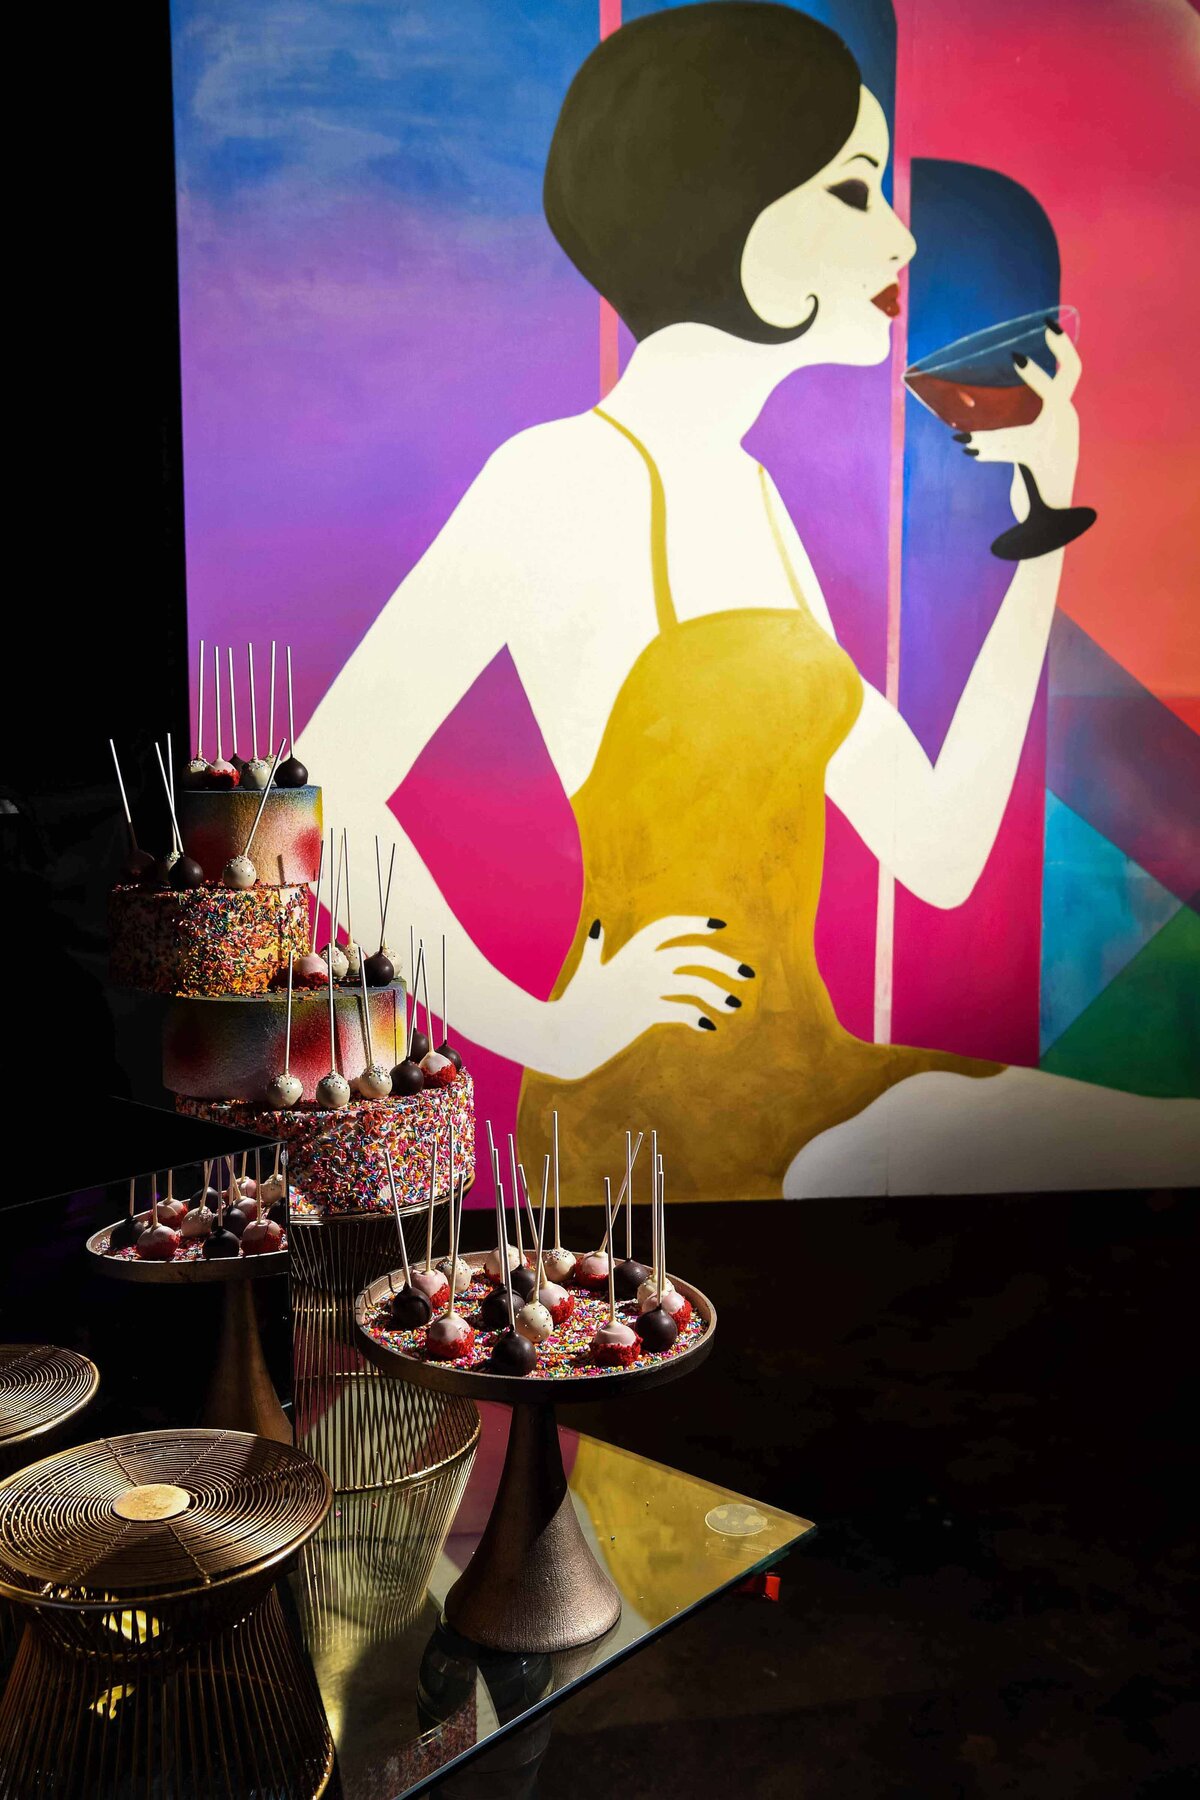 Cake and cake pops are displayed on a table with a painting in background. The image is lit by professional lighting for a creative food product shoot